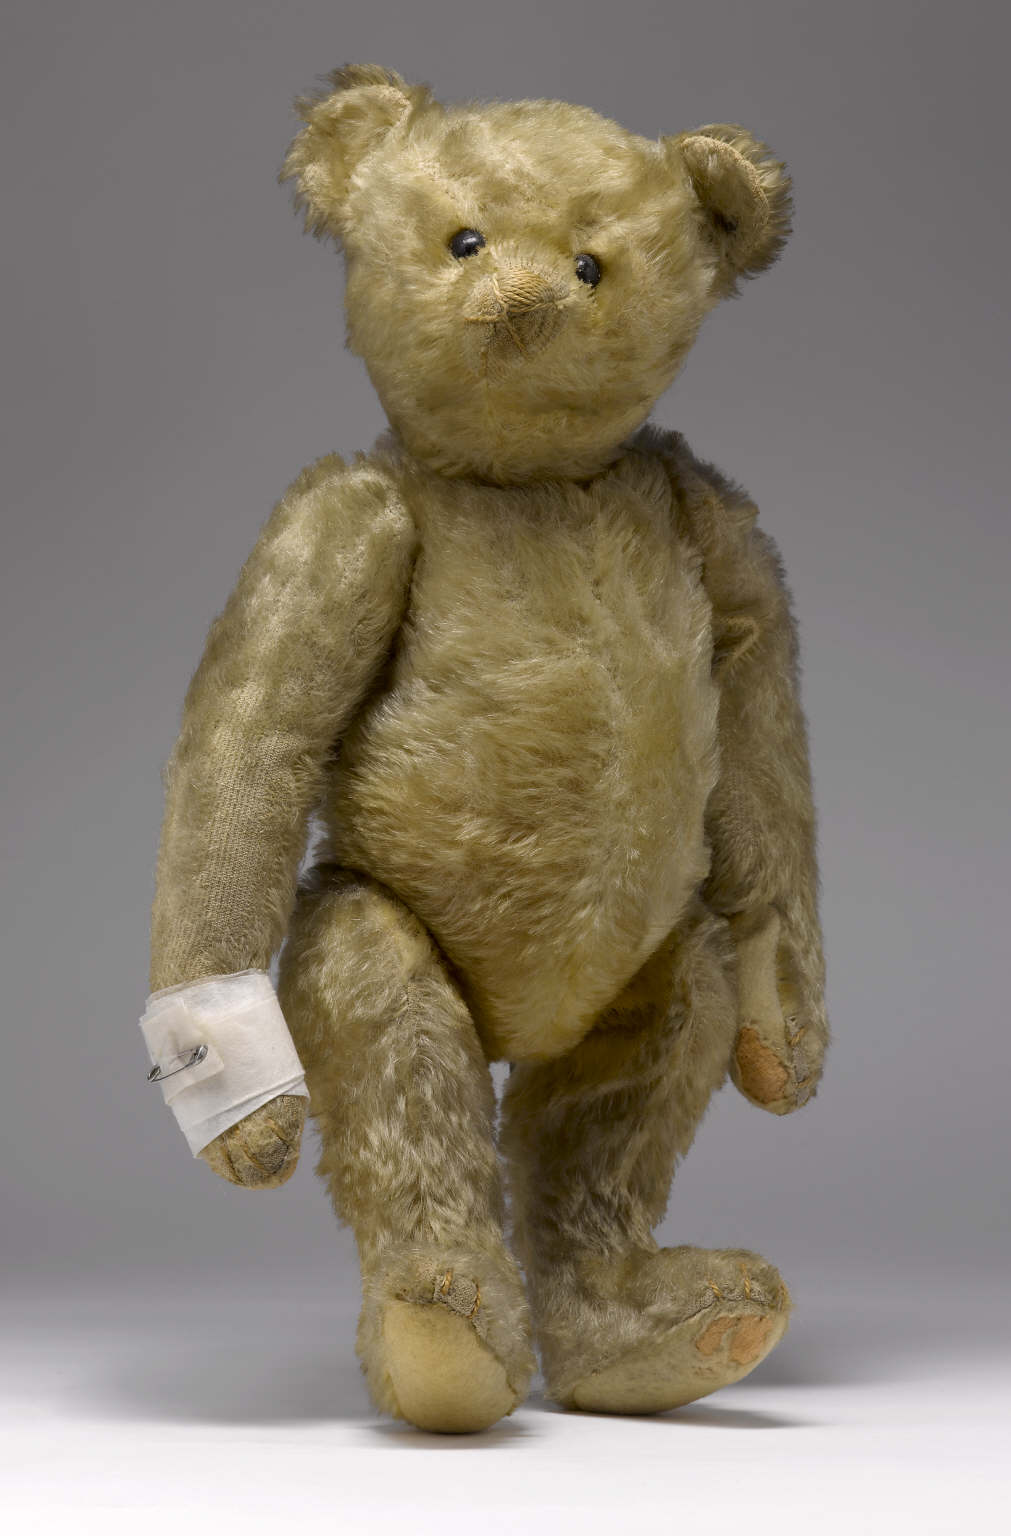 A light brown teddy bear standing on his back legs, with a bandage on his front right paw held in place with a safety pin